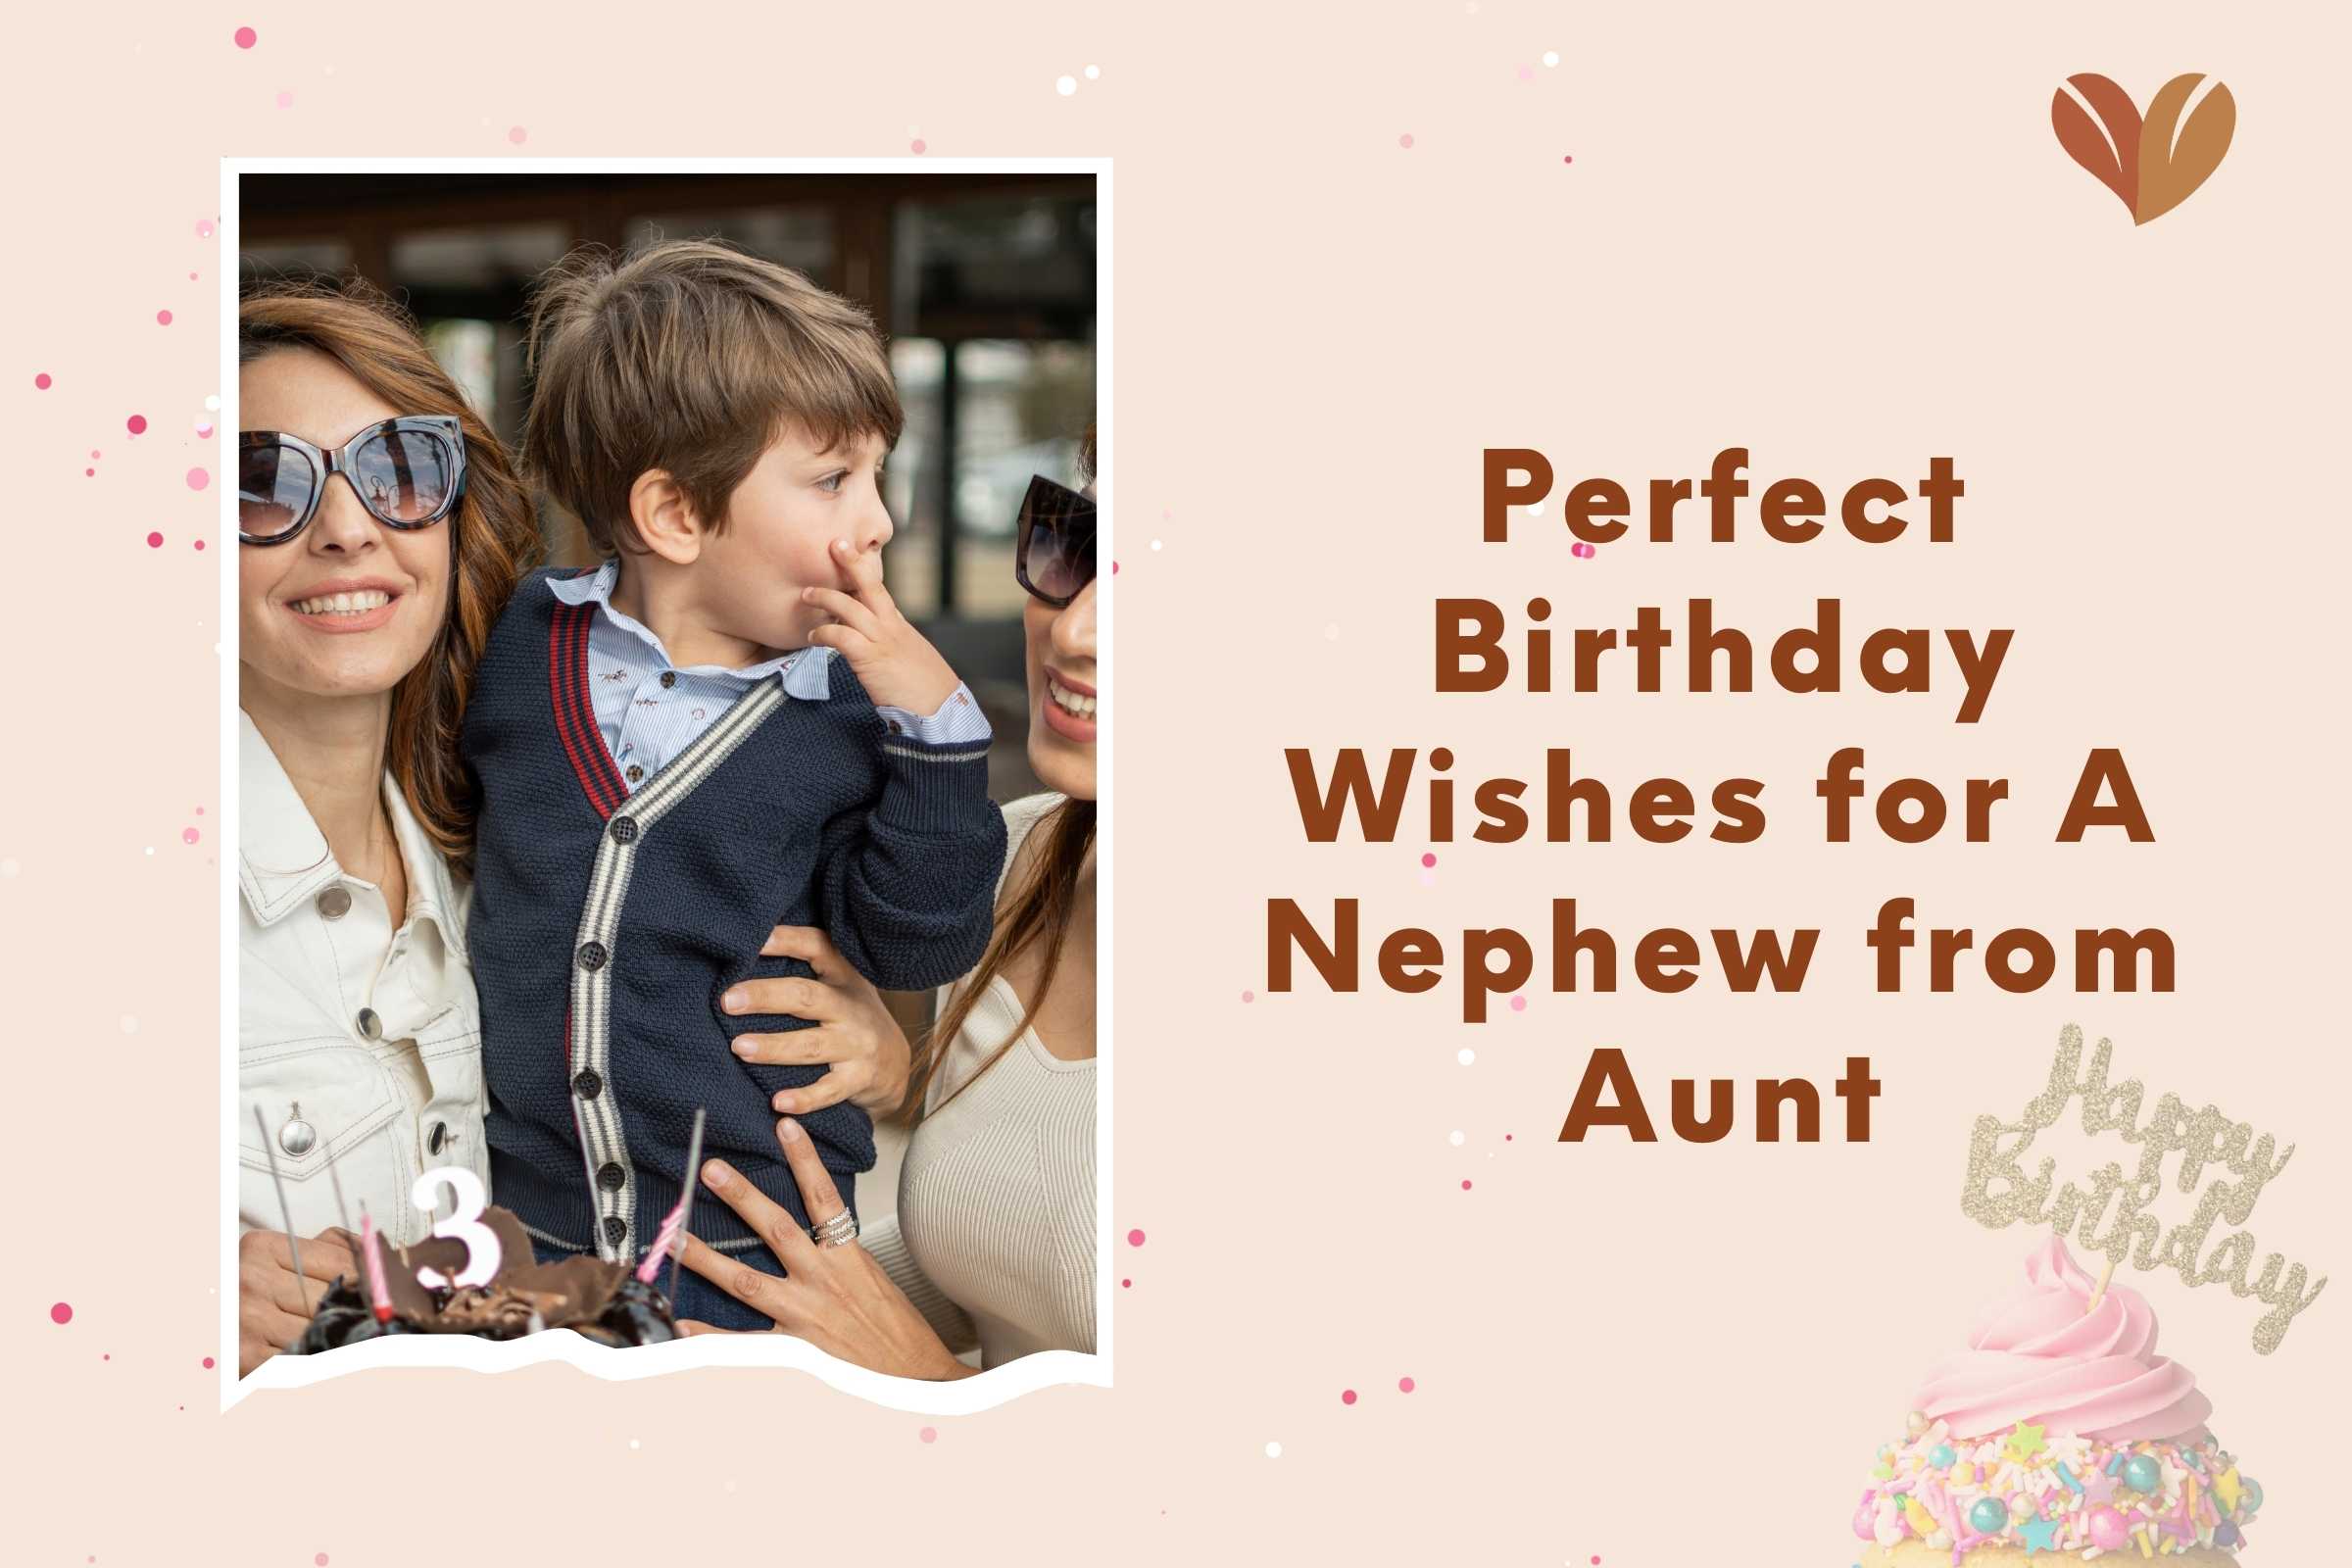 A joyful aunt and nephew share a moment, surrounded by lovely birthday wishes